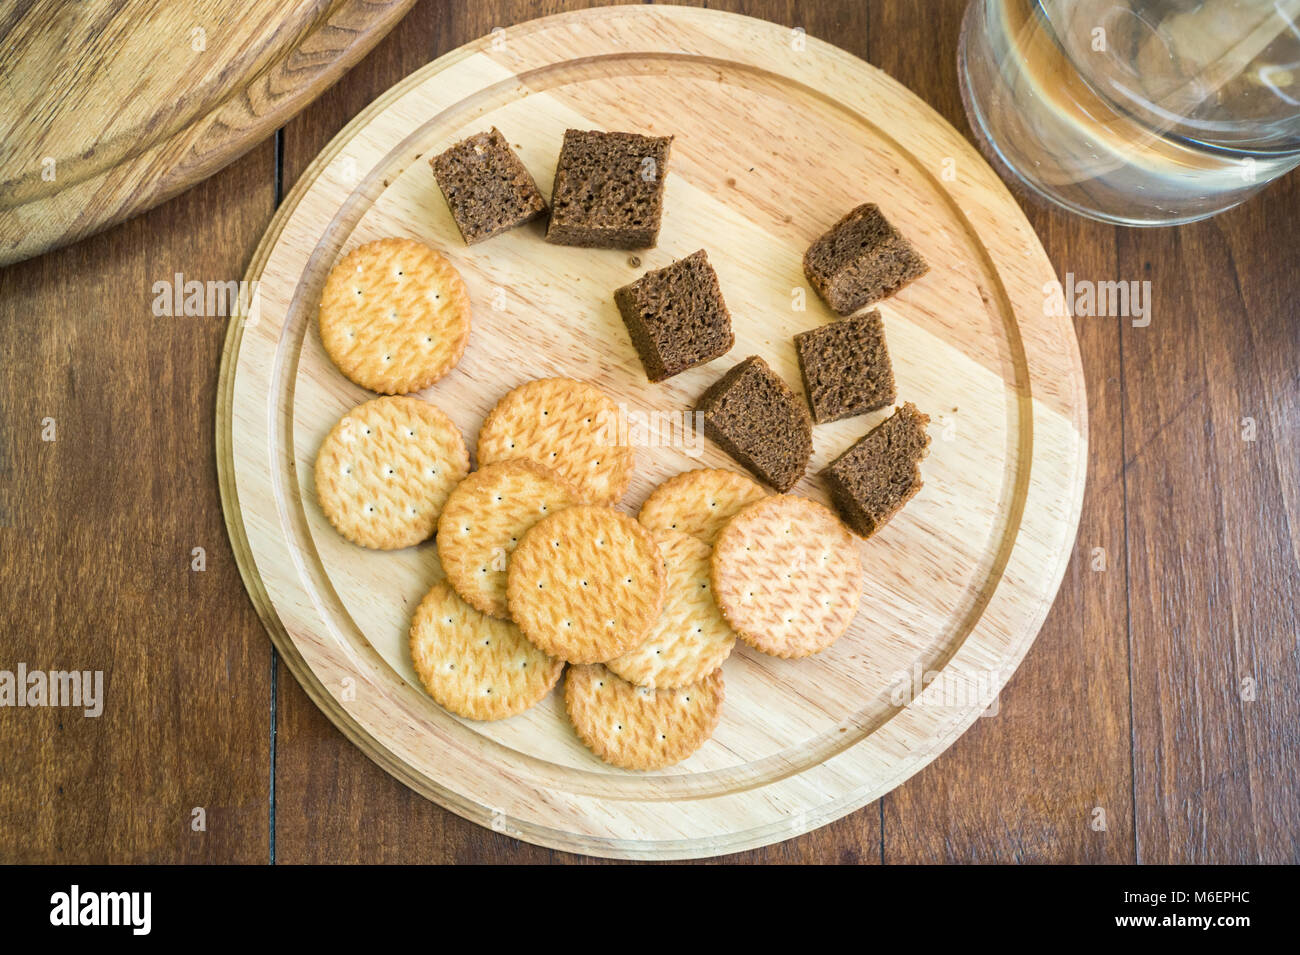 Top view of dry biscuits and corn bread as food sample. Biscuits and dark bread for degustation on a wood plate and water jar, flat lay Stock Photo